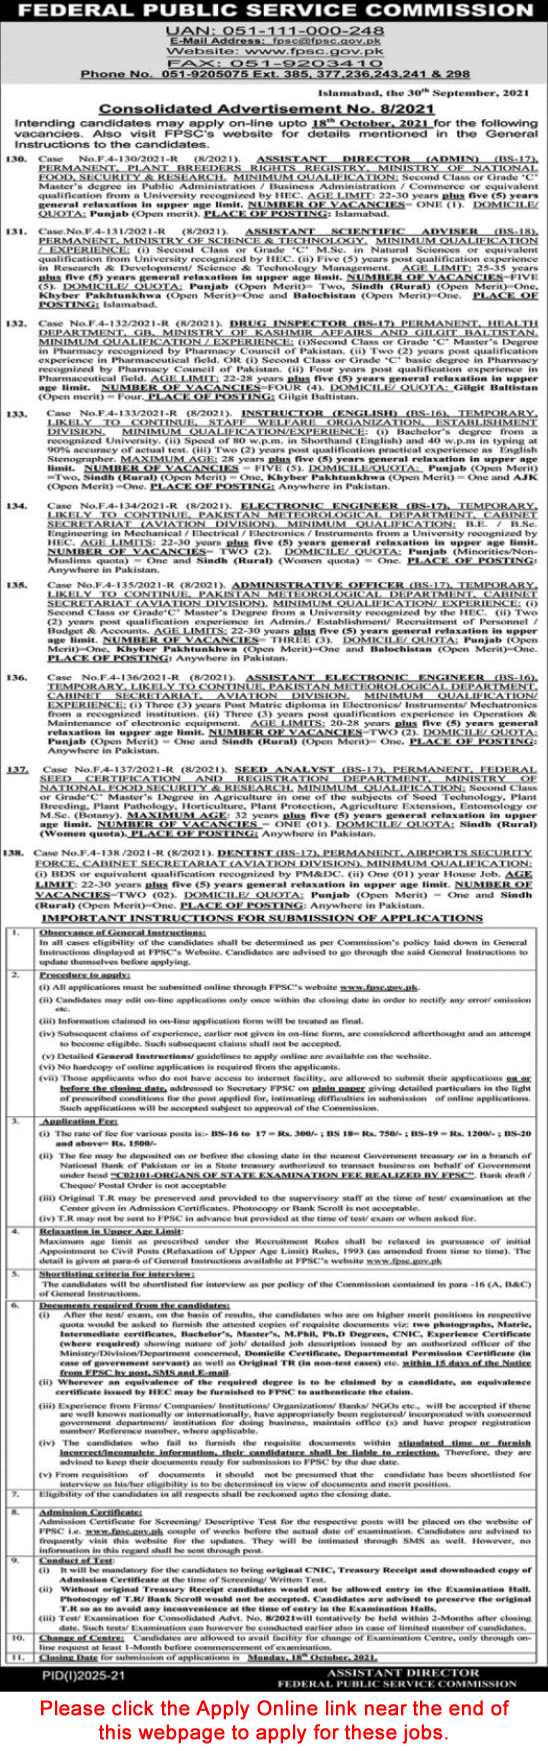 FPSC Jobs October 2021 Apply Online Consolidated Advertisement No 08/2021 8/2021 Latest